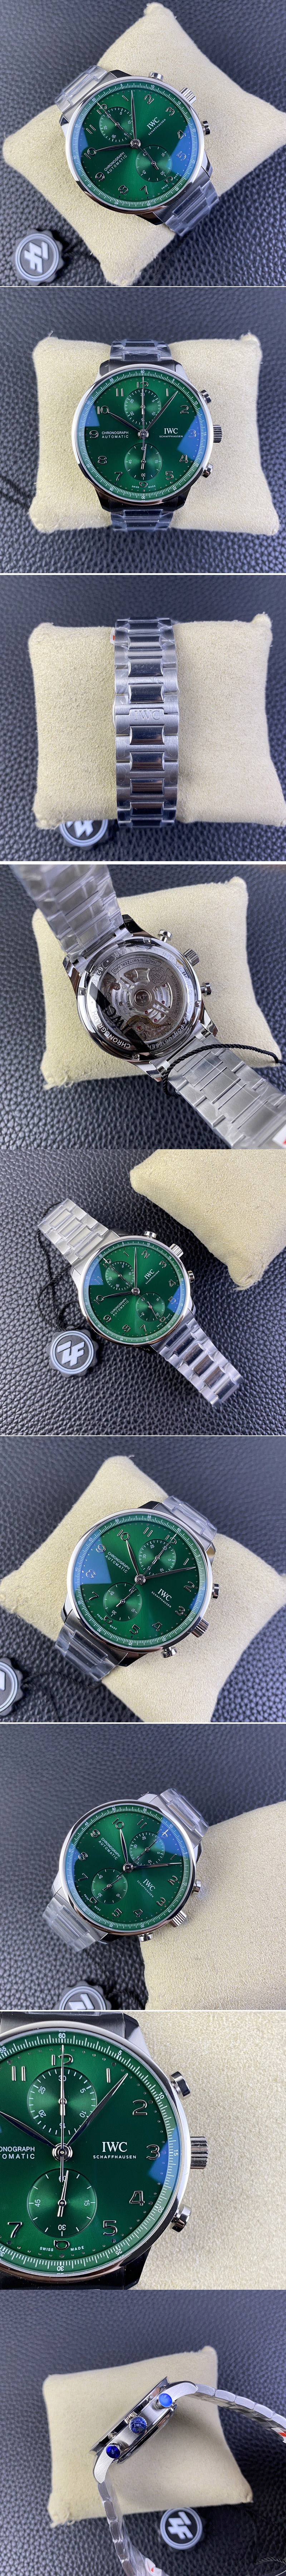 Replica IWC Portuguese Chrono IW3716 ZF 1:1 Best Edition Green Dial on SS Bracelet A69355